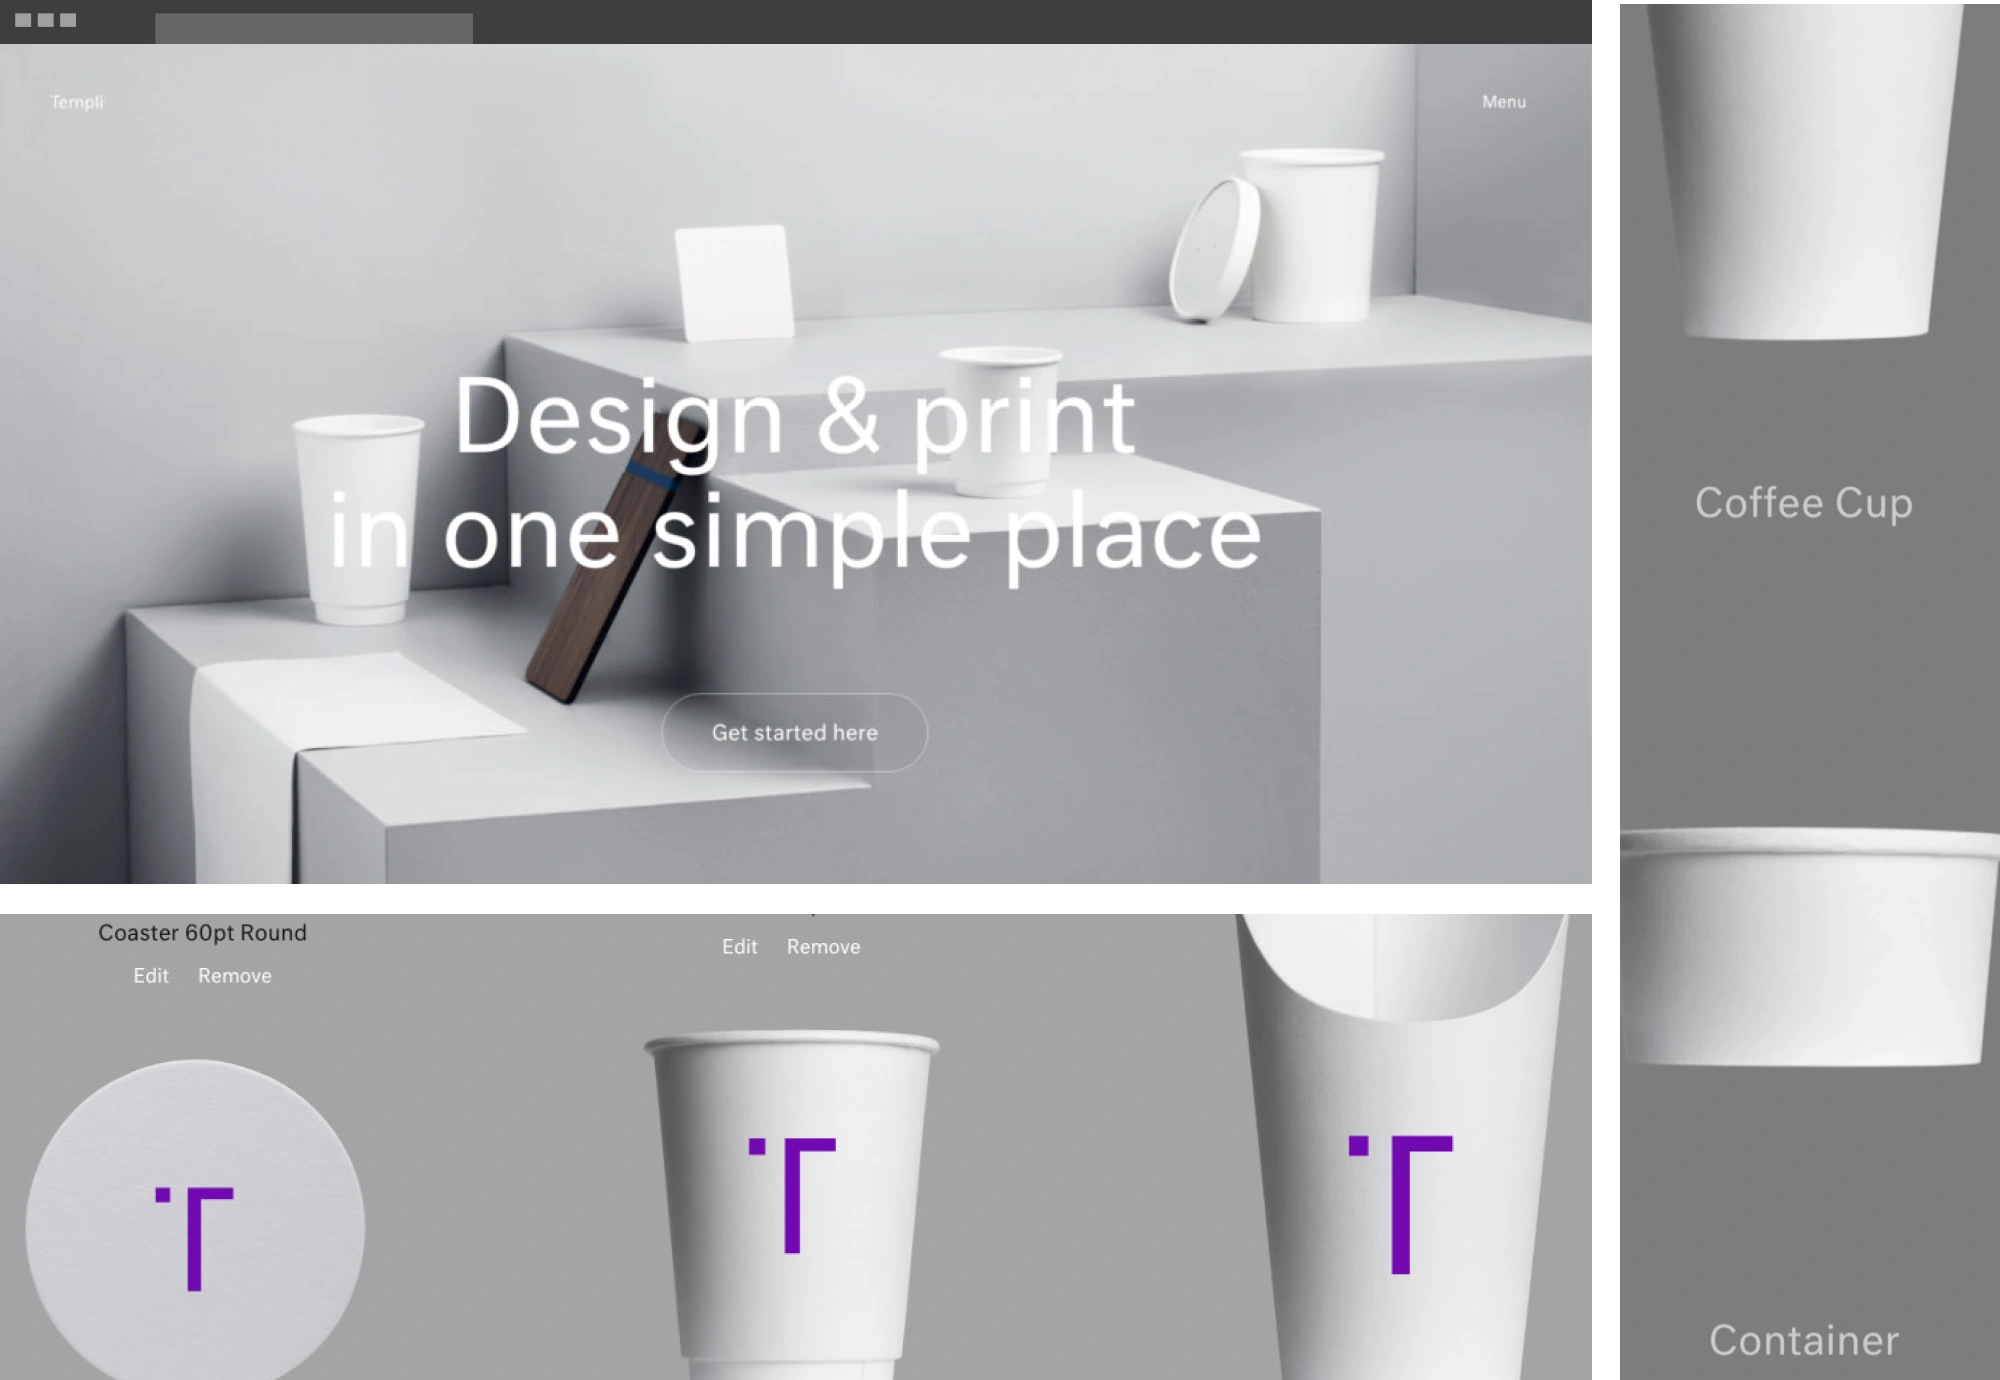 Image showing a product designed or developed by Shift Lab for Templi